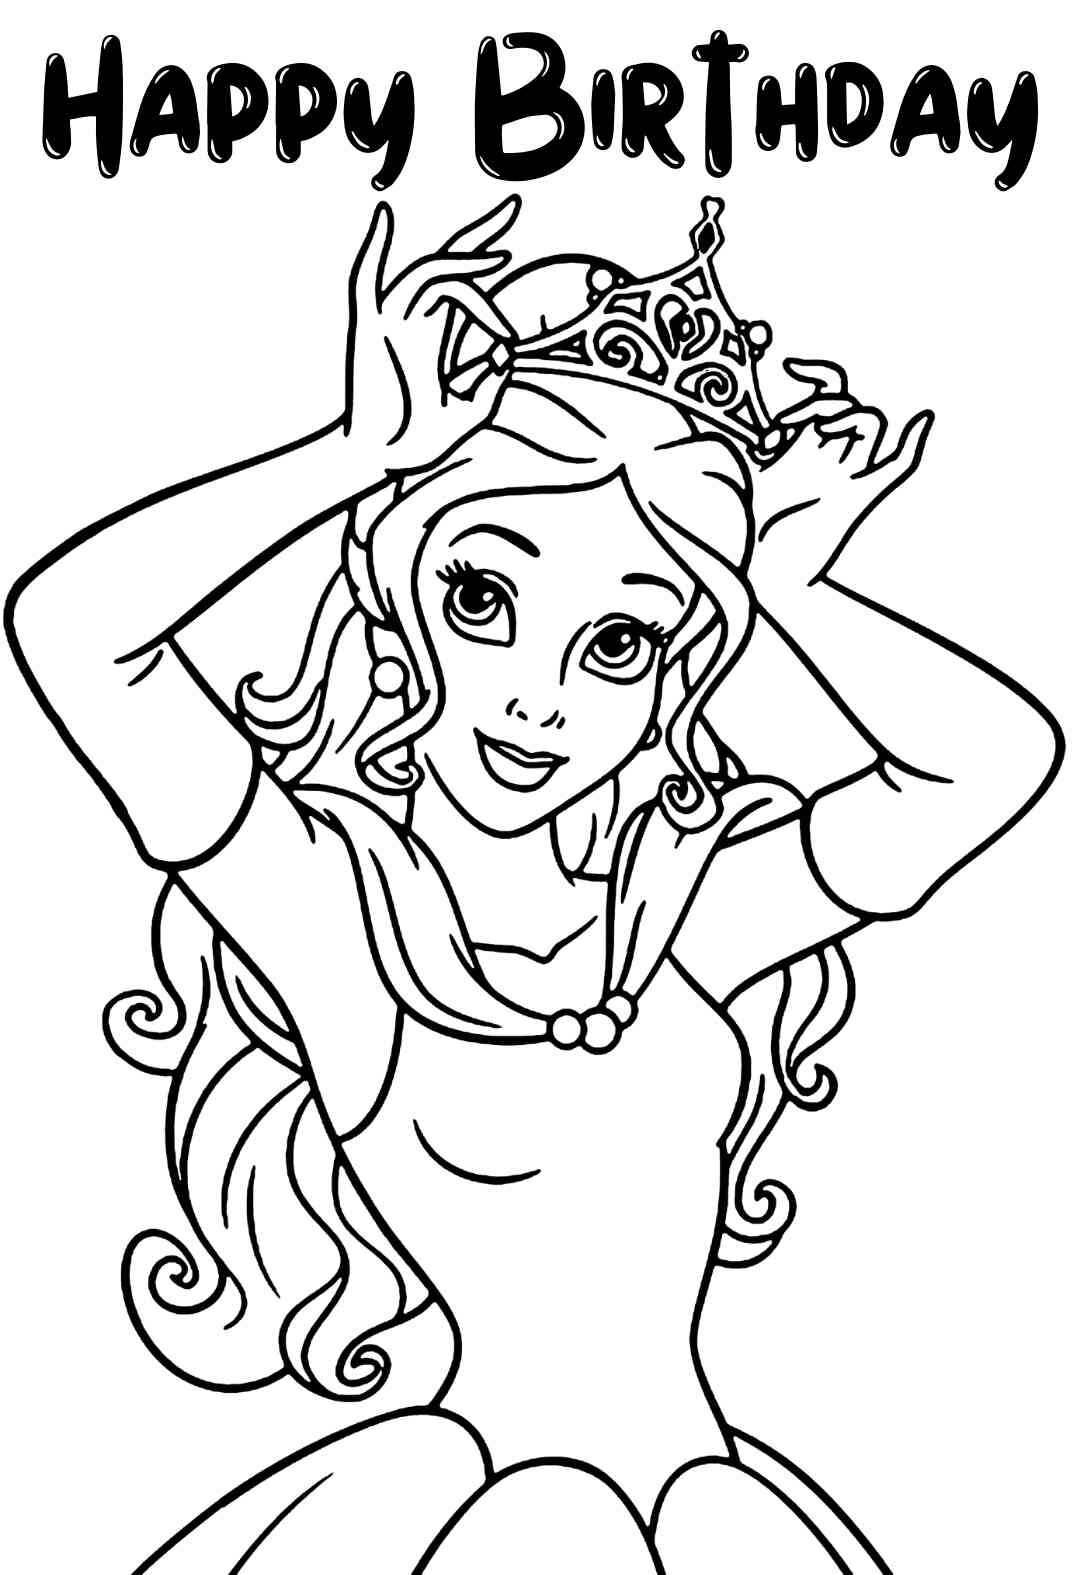 20 Beautiful Princess Birthday Coloring Pages & Cards free ...